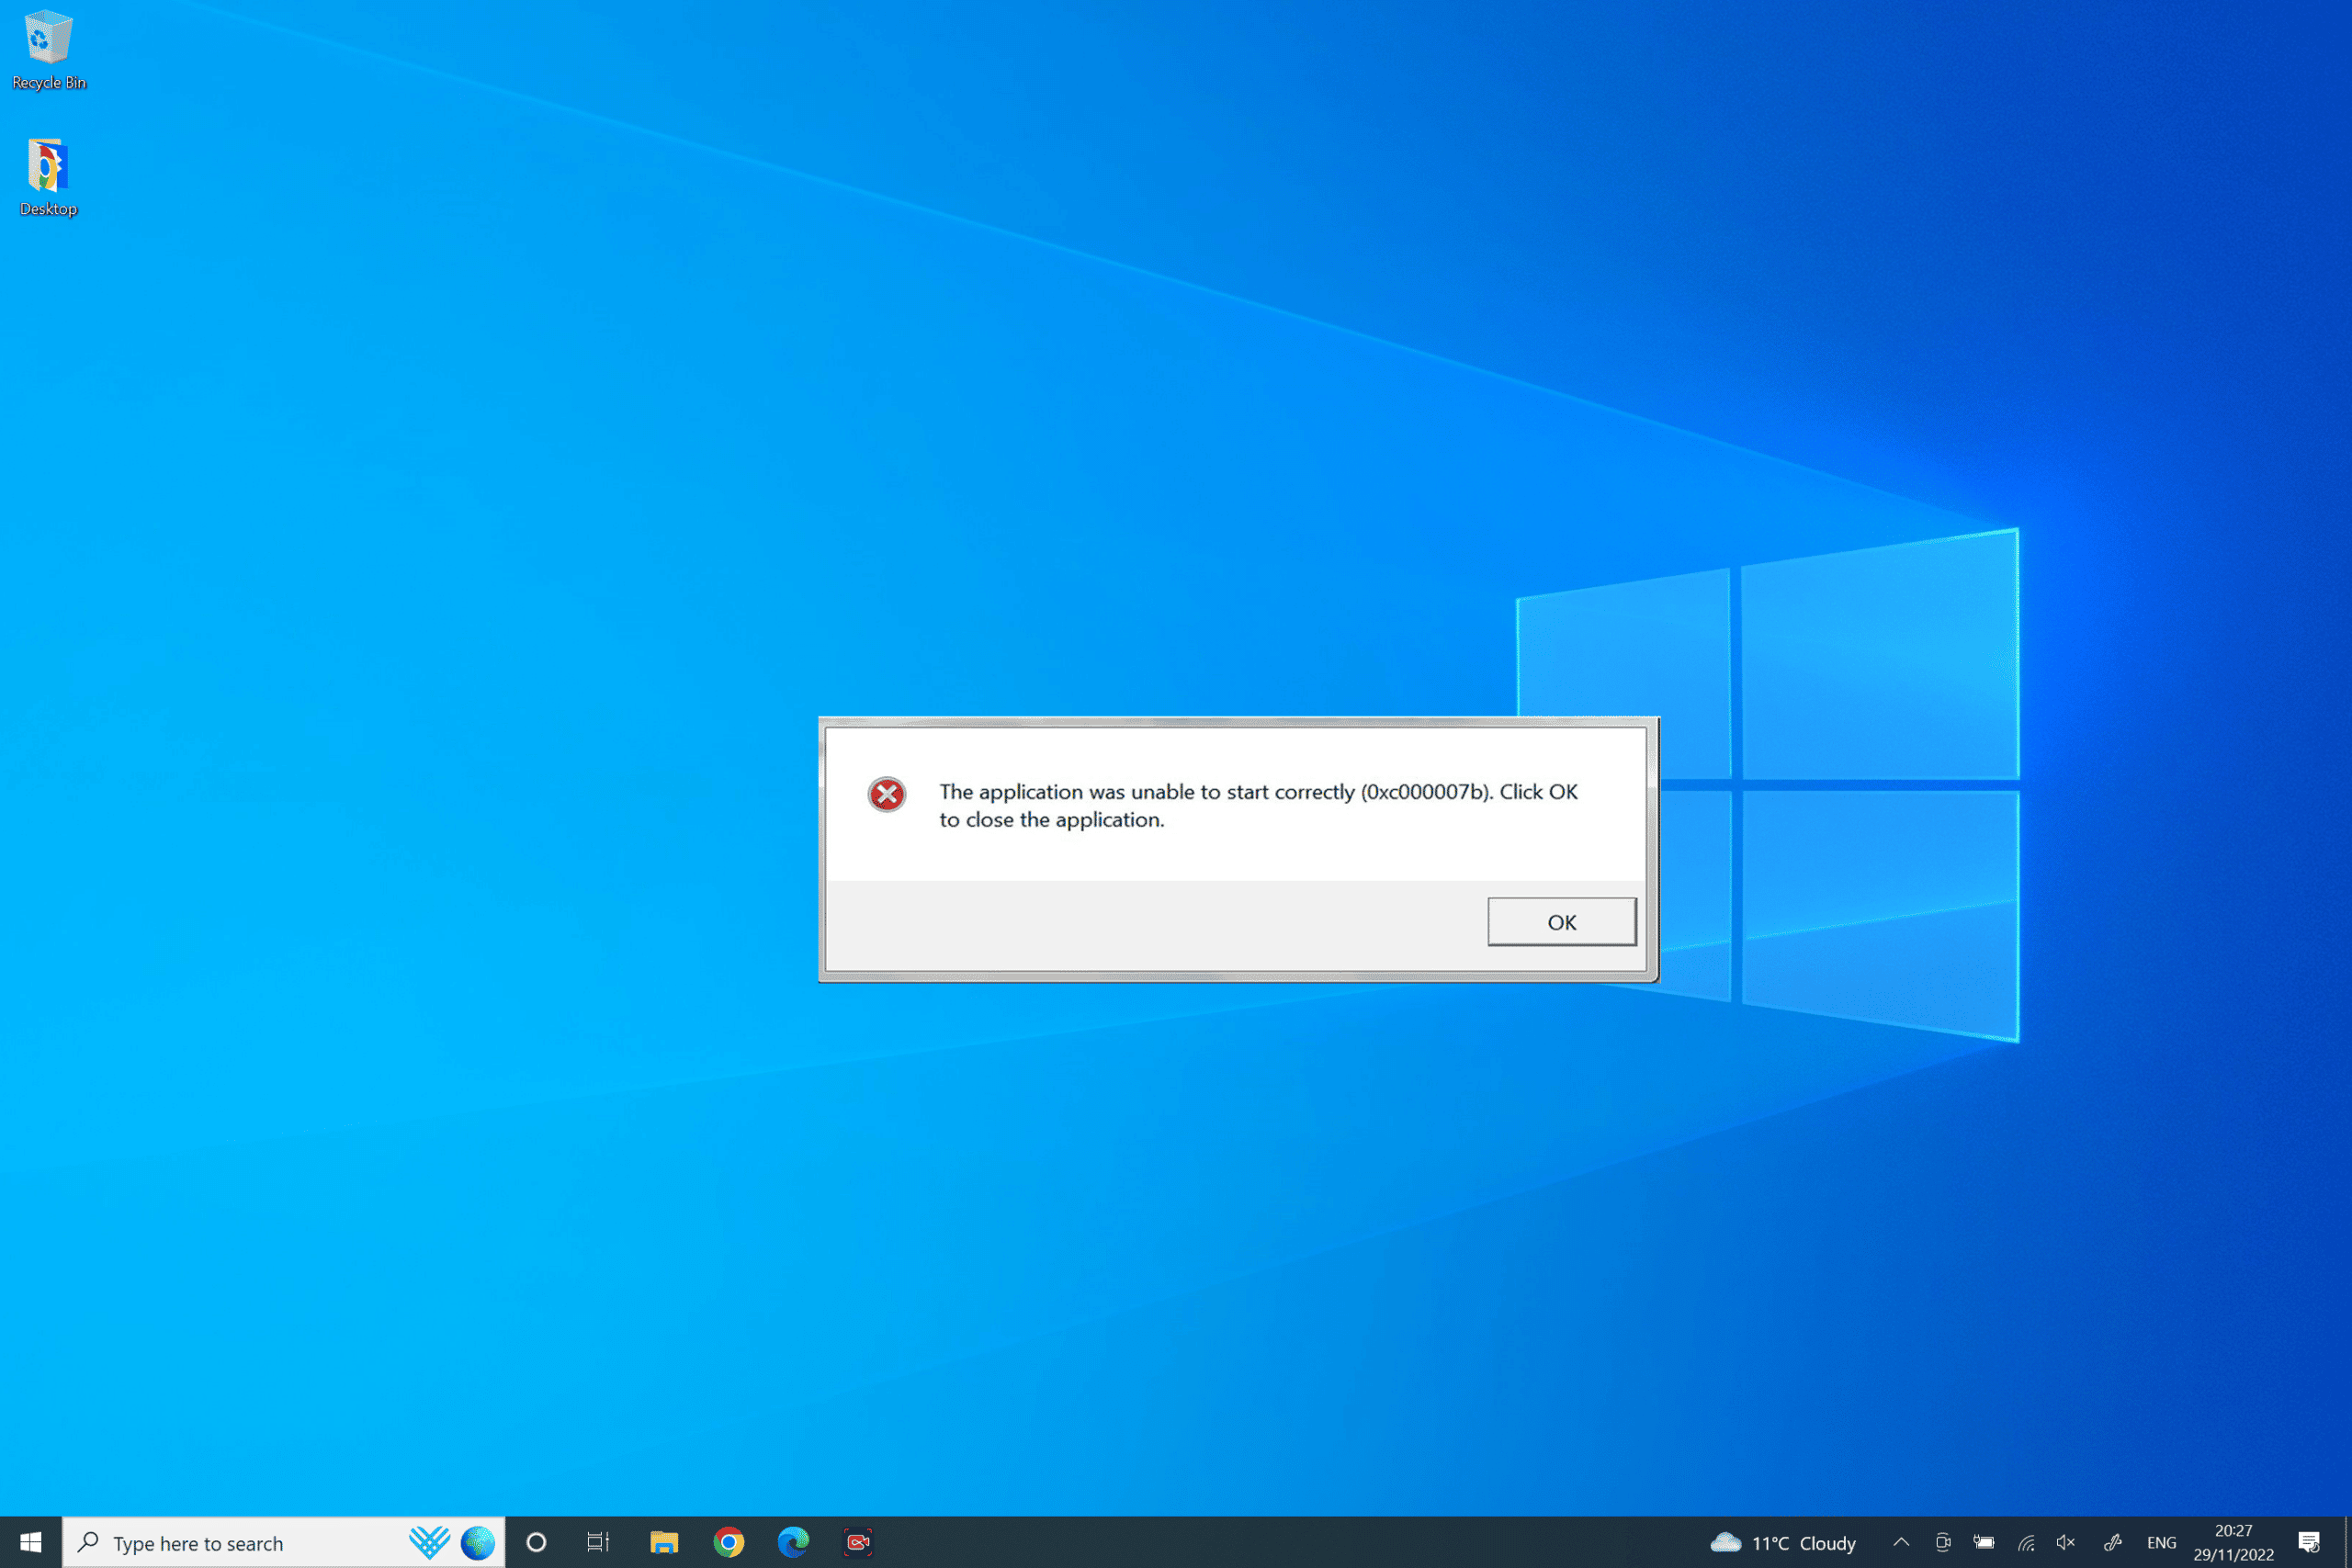 The application was unable to start correctly 0xc00007b